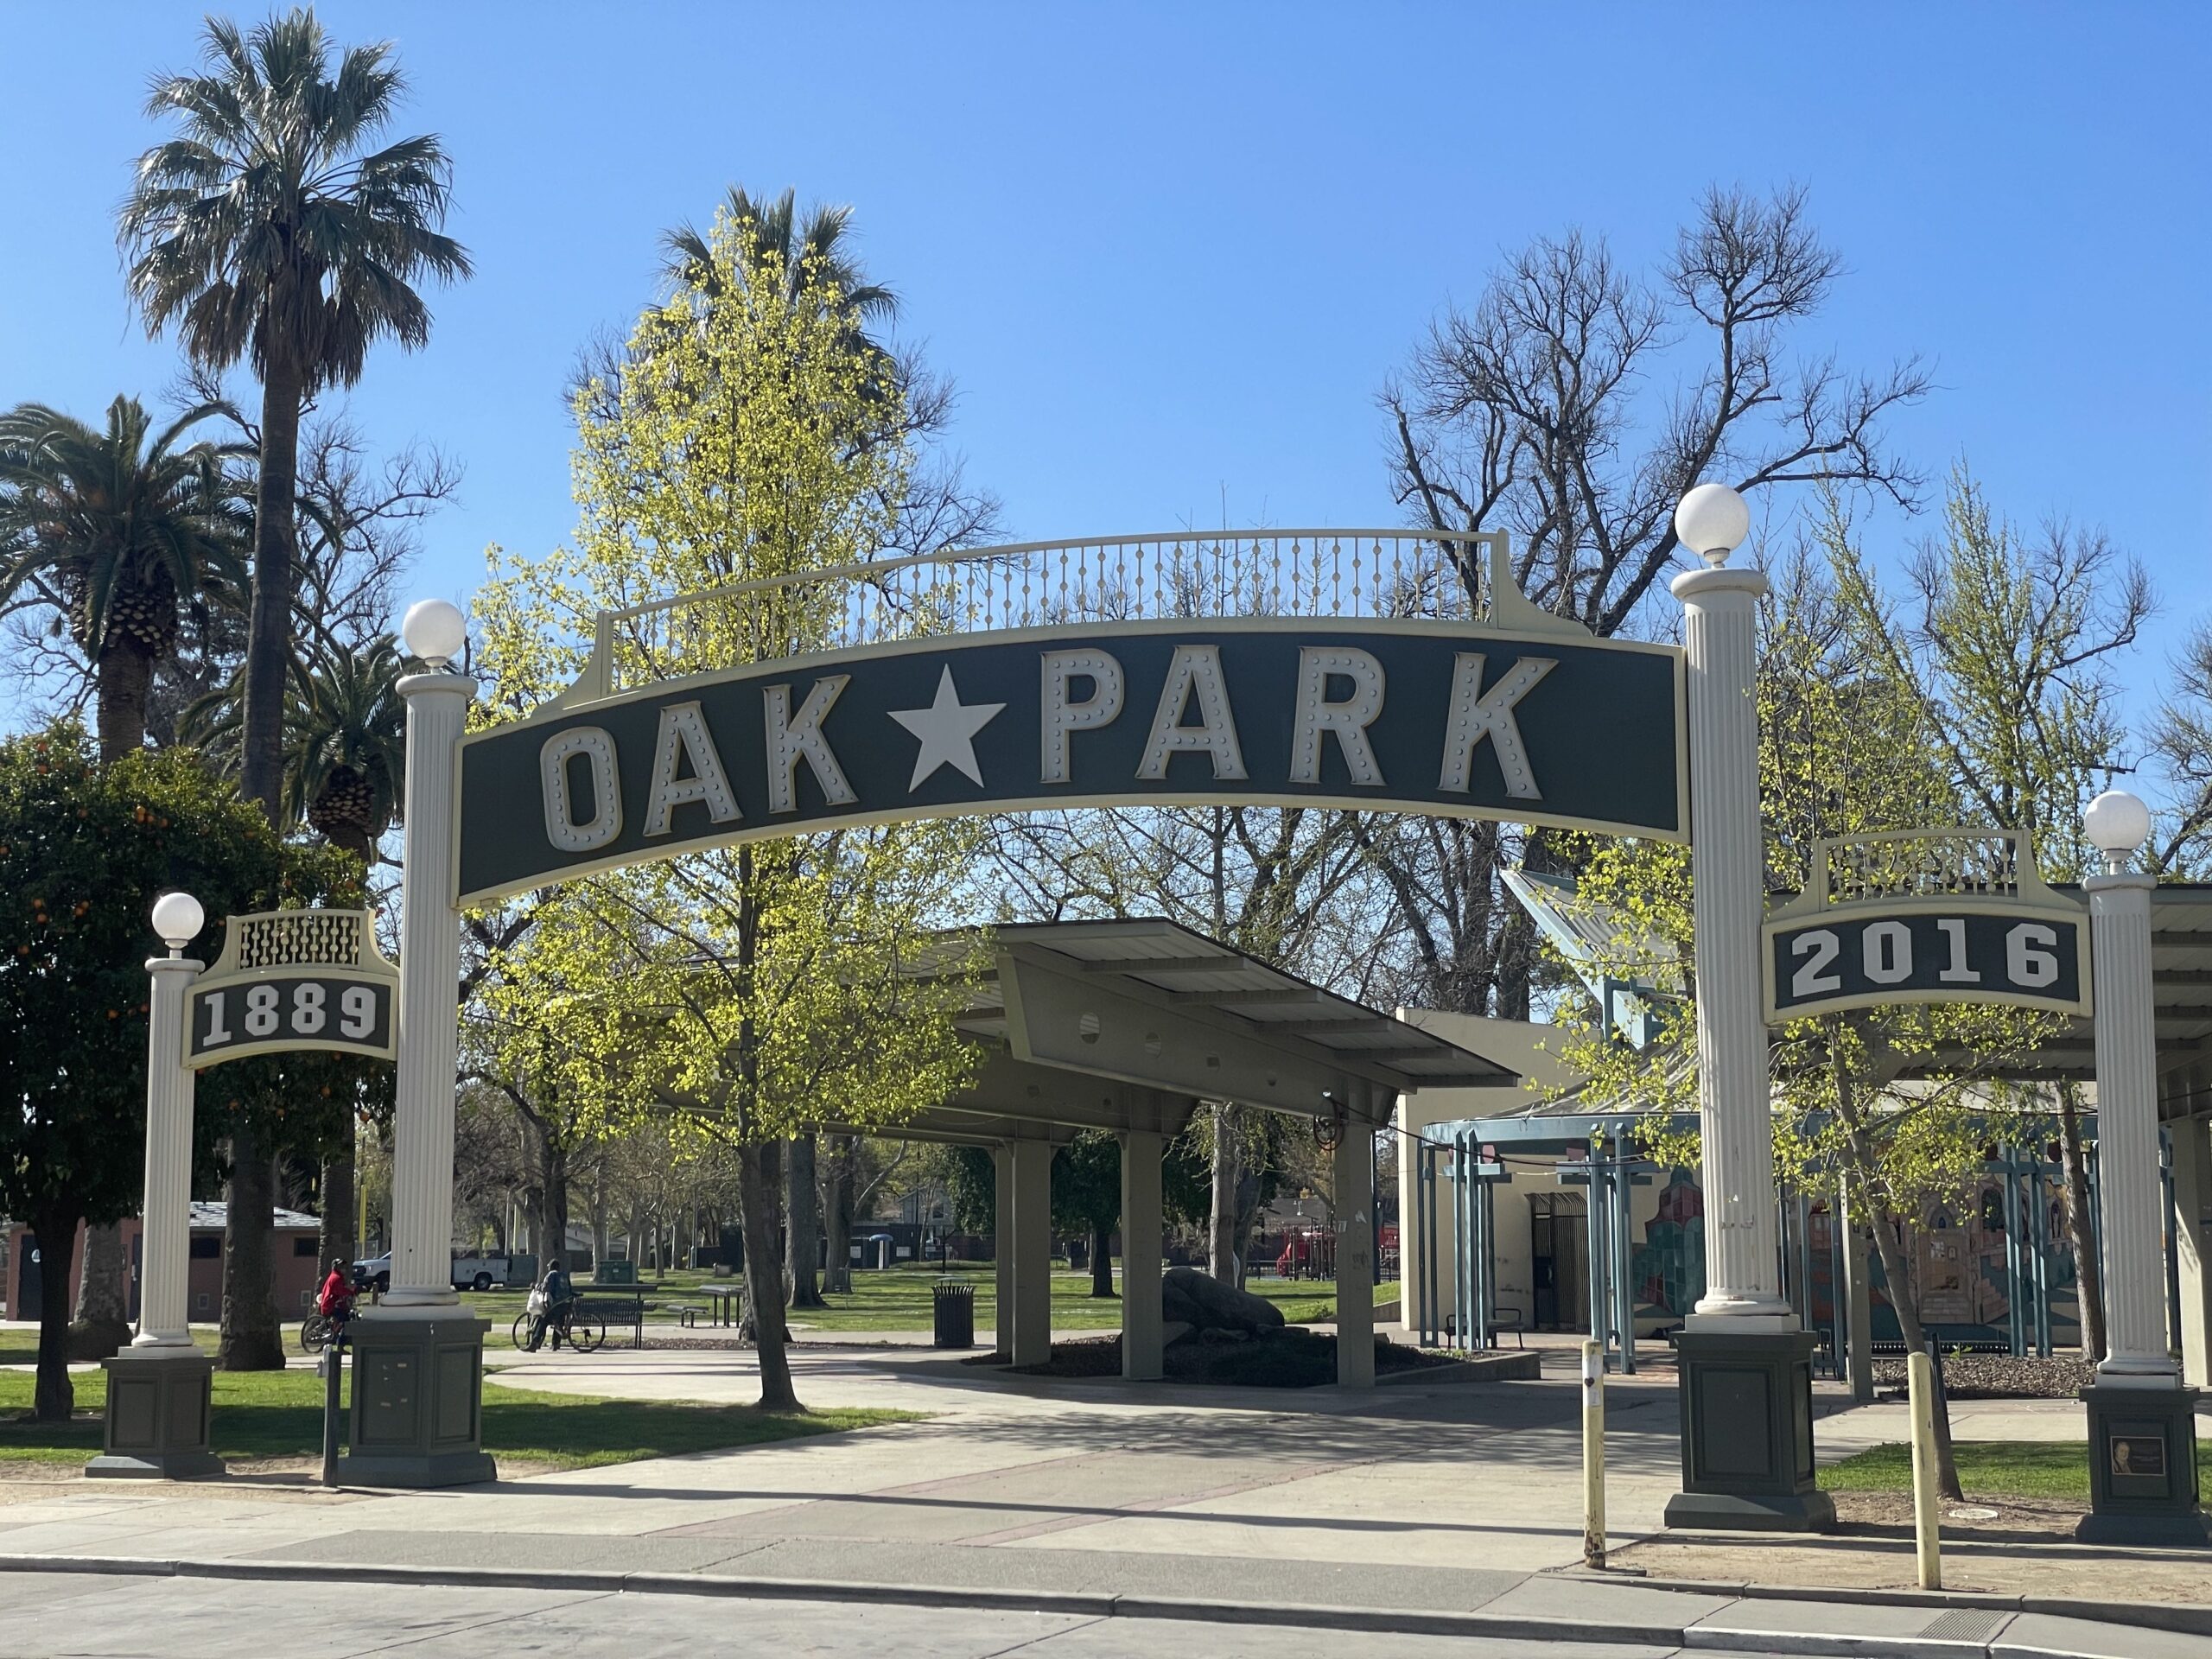 oak park sign surrounded by trees on a sunny day